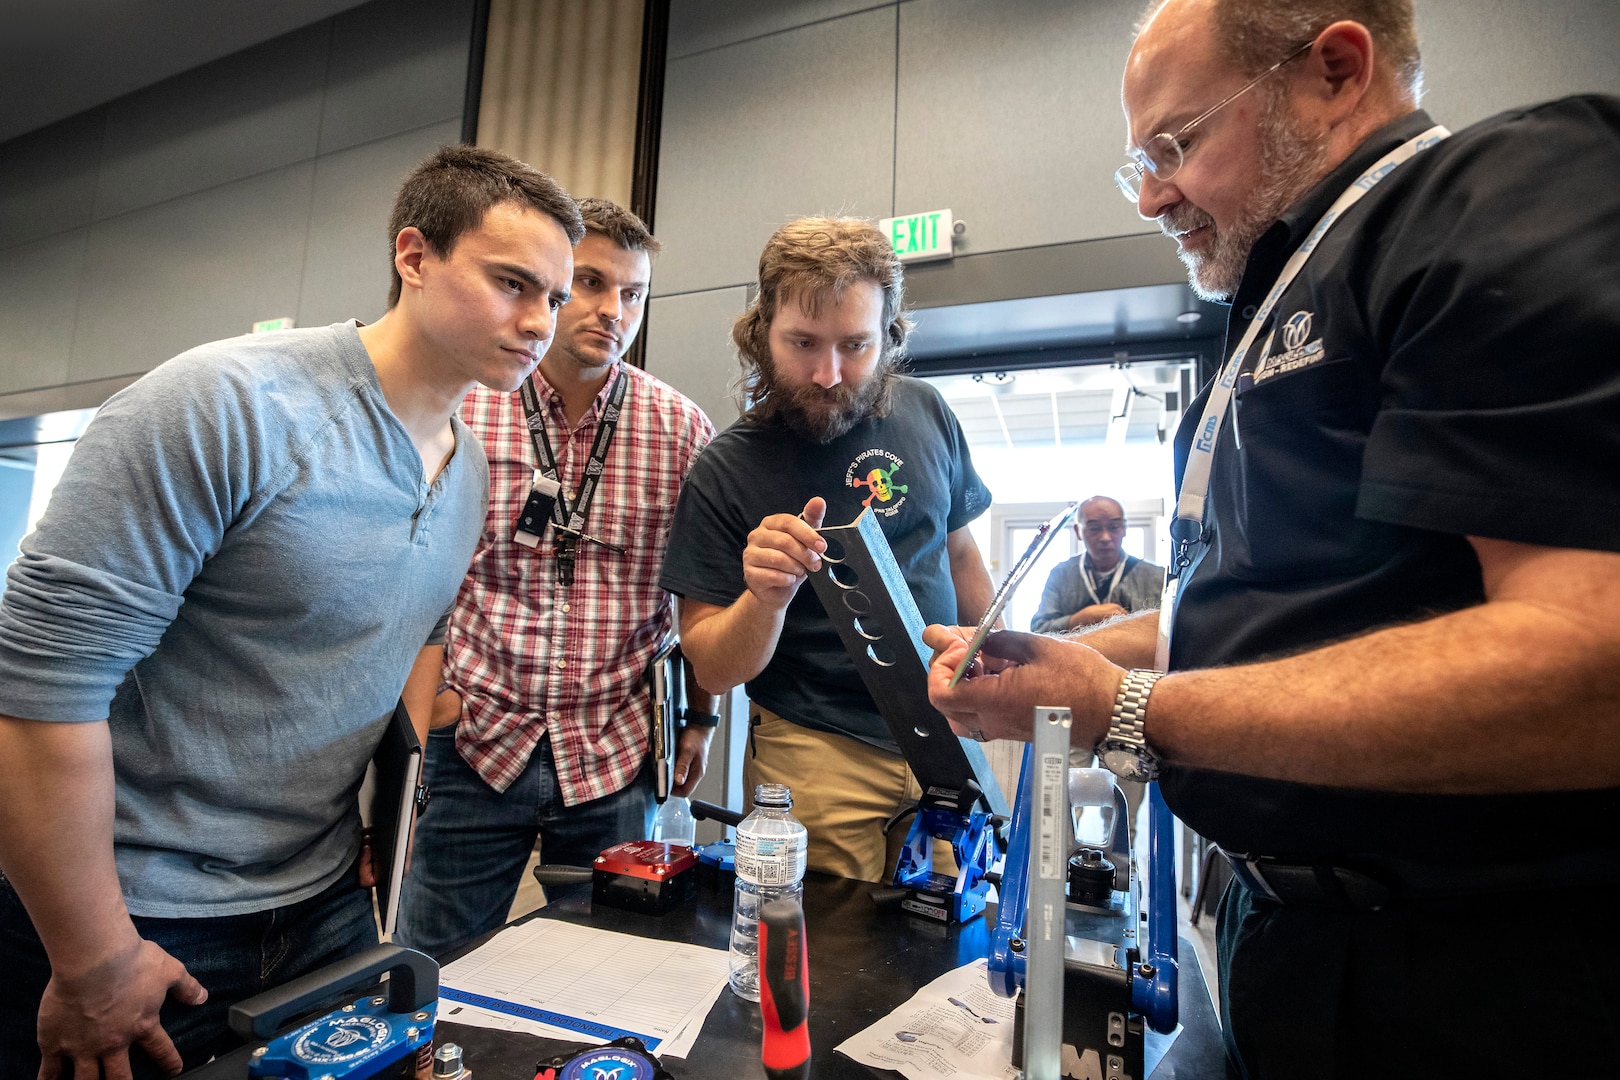 PSNS & IMF employees view a demonstration of tools during a technology showcase hosted by the National Center for Manufacturing Science at the Kitsap Conference Center July 25. More than 50 companies displayed equipment, tools, supplies and safety gear to more cost-effectively and efficiently help shipyard workers maintain, modernize and retire the Navy’s fleet.